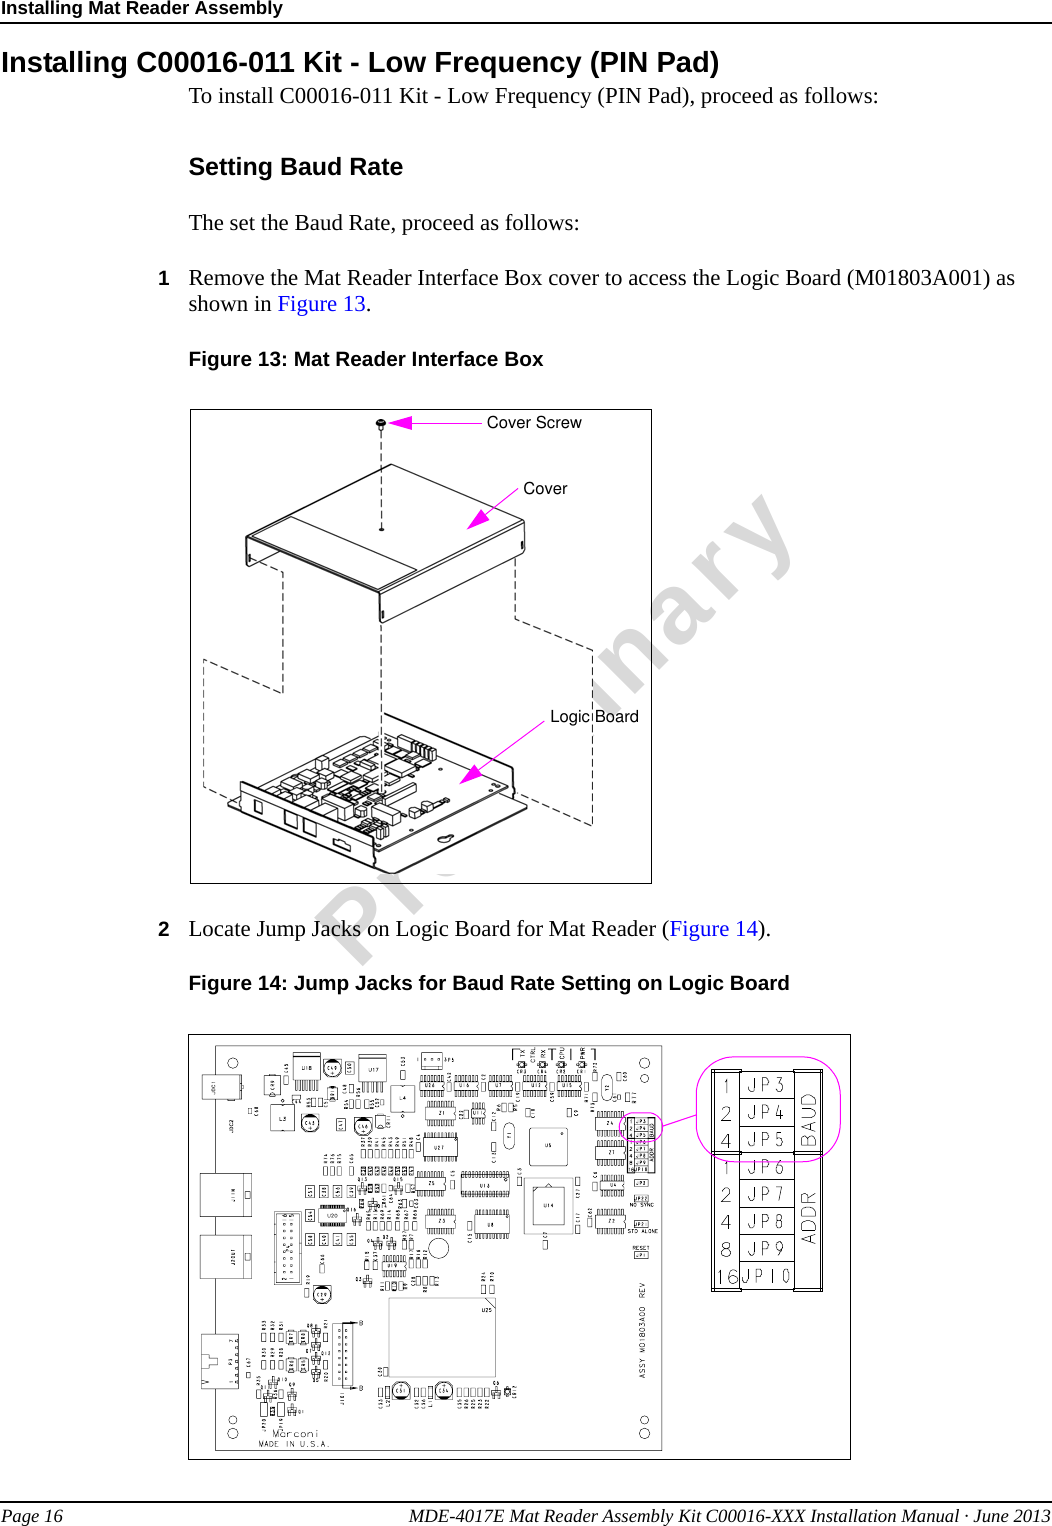 Installing Mat Reader AssemblyPage 16 MDE-4017E Mat Reader Assembly Kit C00016-XXX Installation Manual · June 2013PreliminaryInstalling C00016-011 Kit - Low Frequency (PIN Pad)To install C00016-011 Kit - Low Frequency (PIN Pad), proceed as follows:Setting Baud RateThe set the Baud Rate, proceed as follows:1Remove the Mat Reader Interface Box cover to access the Logic Board (M01803A001) as shown in Figure 13.Figure 13: Mat Reader Interface BoxCover ScrewCoverLogic Board2Locate Jump Jacks on Logic Board for Mat Reader (Figure 14).Figure 14: Jump Jacks for Baud Rate Setting on Logic Board